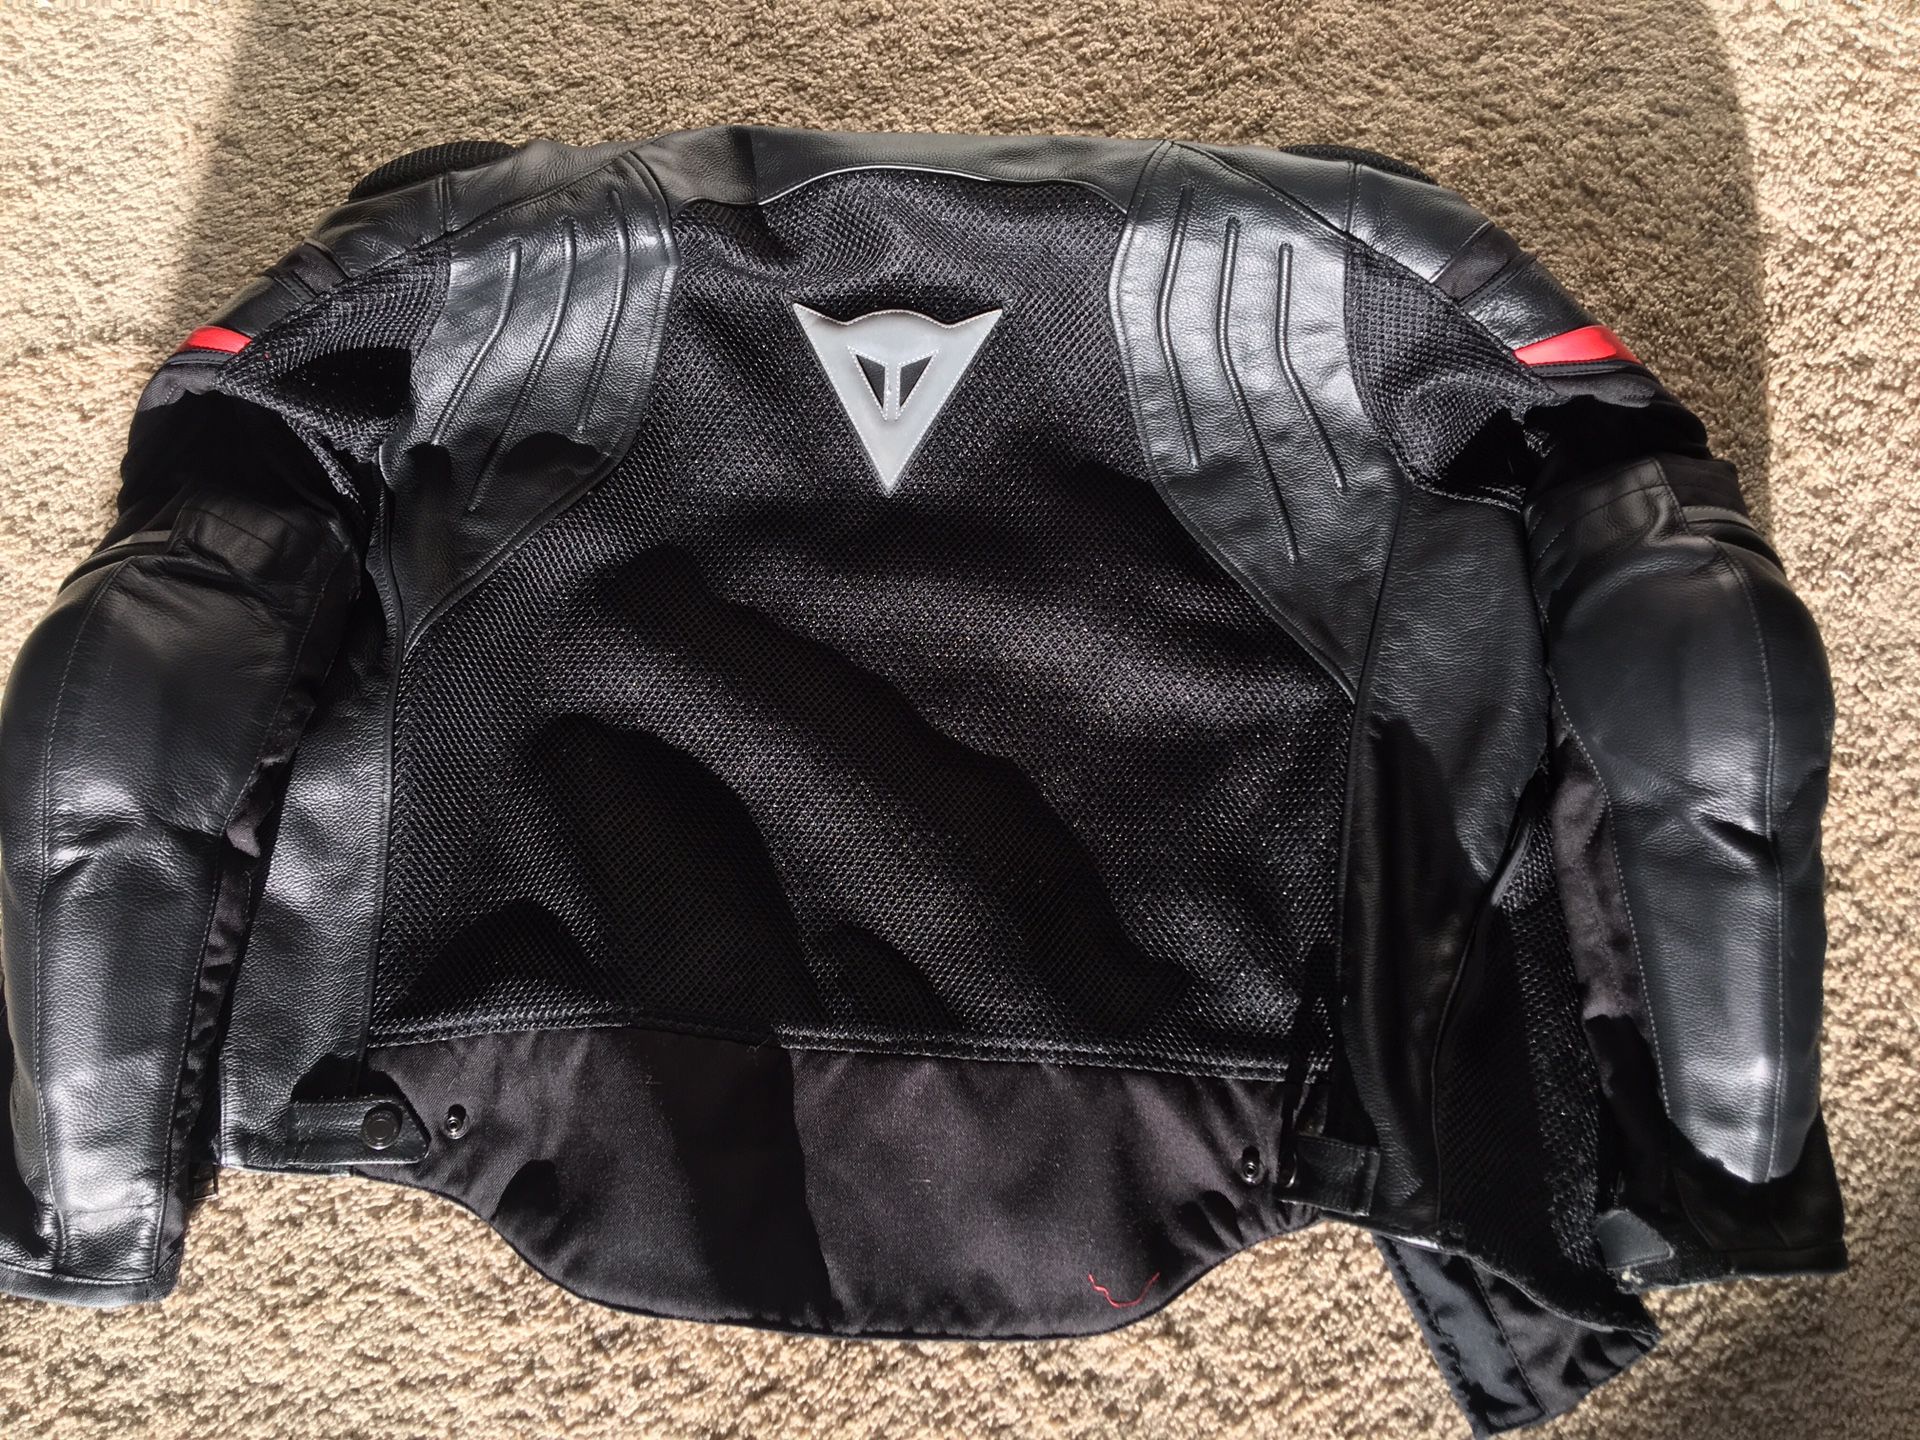 Dainese Air Frazer Motorcycle Jacket